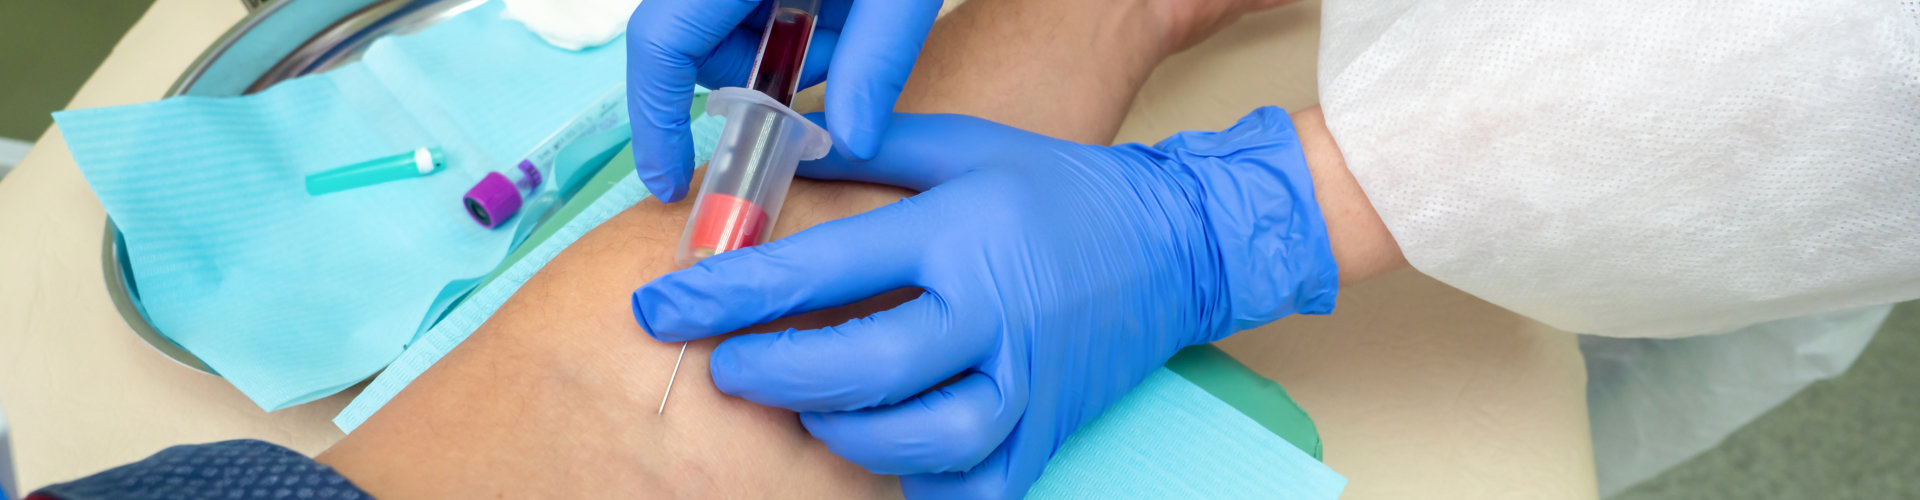 phlebotomist extracting blood sample from patient